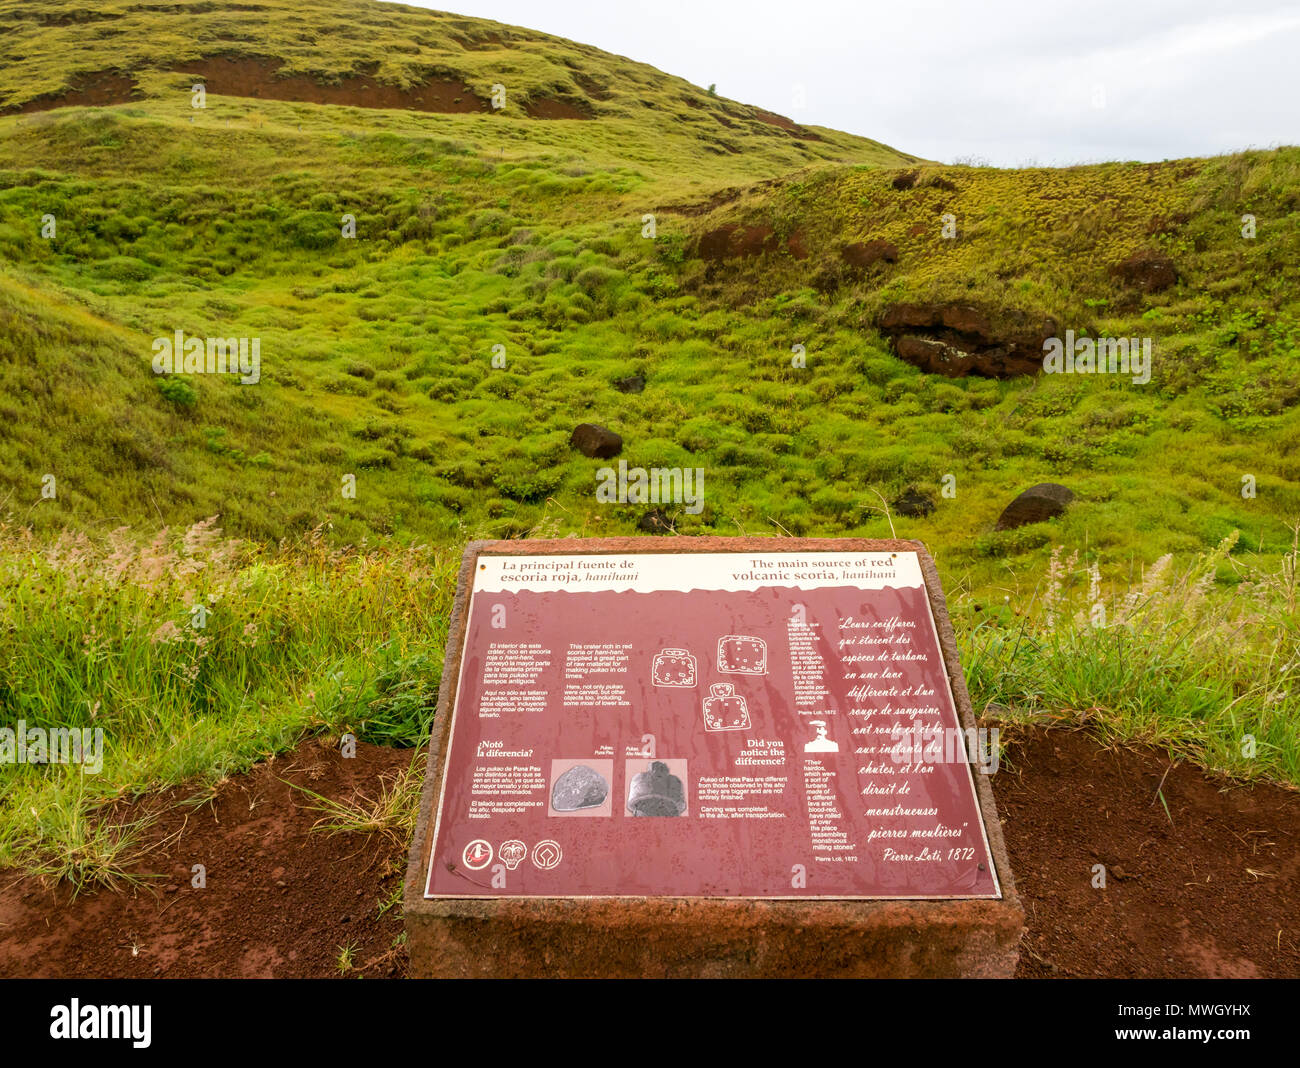 Visitor information board, Puna Pau quarry, source of red volcanic scouria rock used to carve top knots for Easter Island Moai stone figures Stock Photo